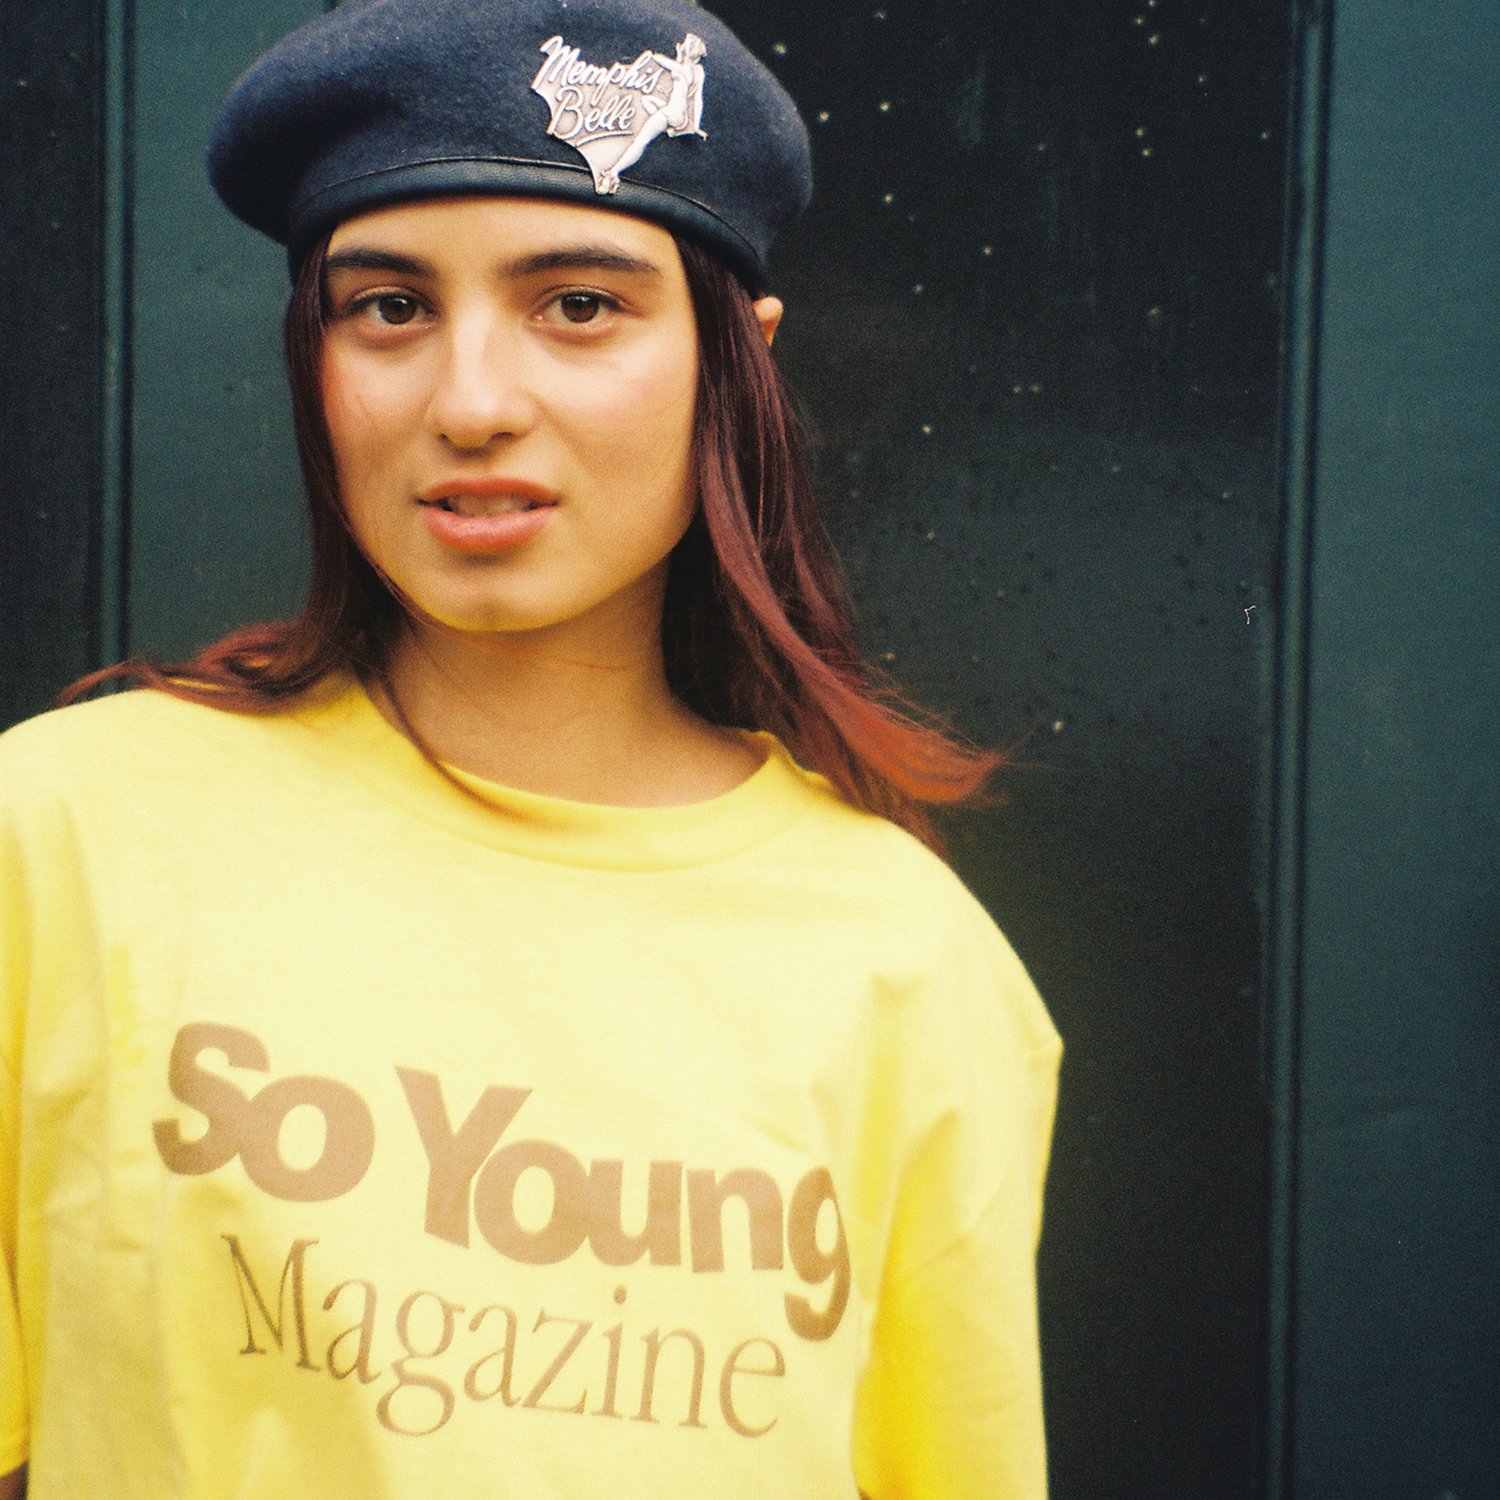 Image of So Young Golden Brown T-Shirt